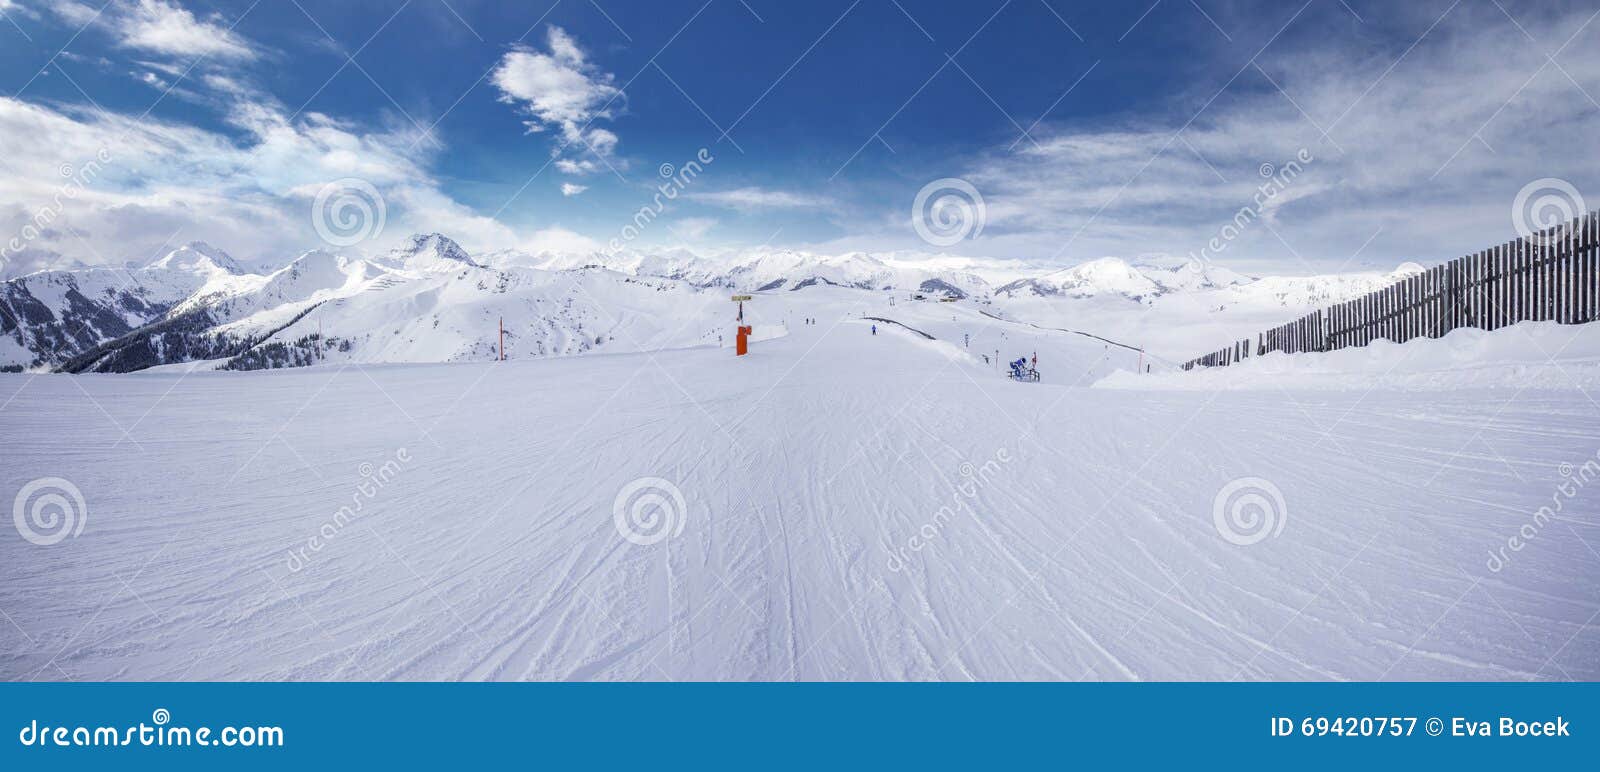 panoramaview to ski slopes and skiers skiing in kitzbuehel mountain ski resort with a background to alps in austria